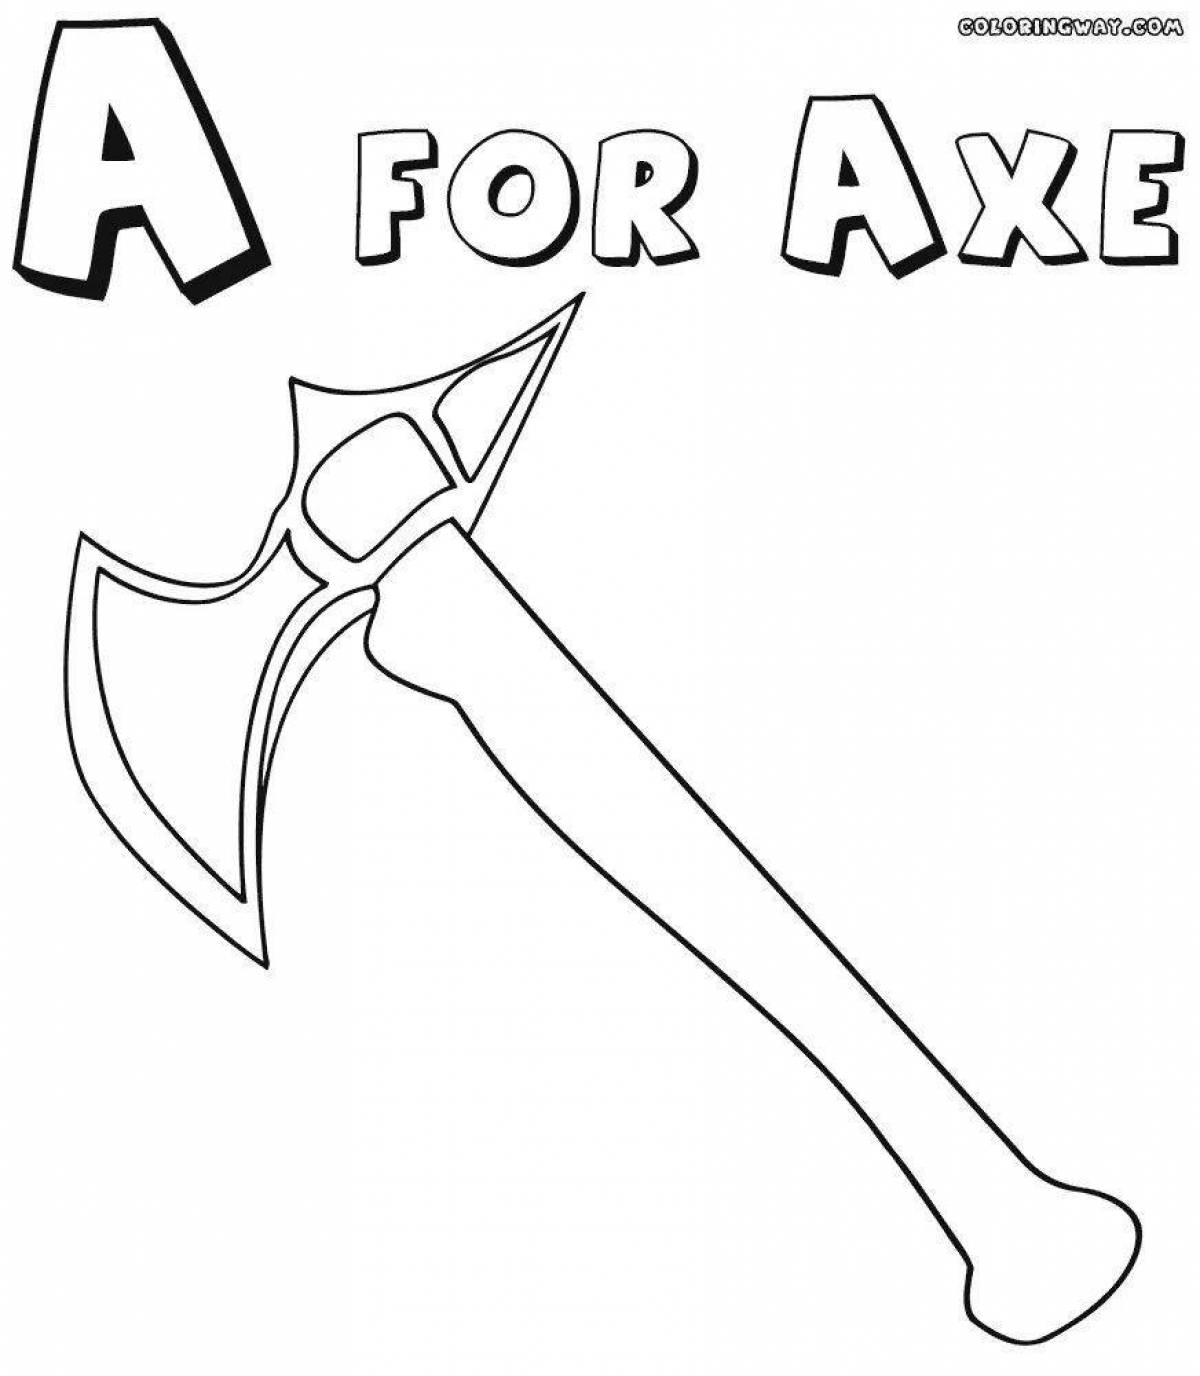 Awesome ax coloring page for kids